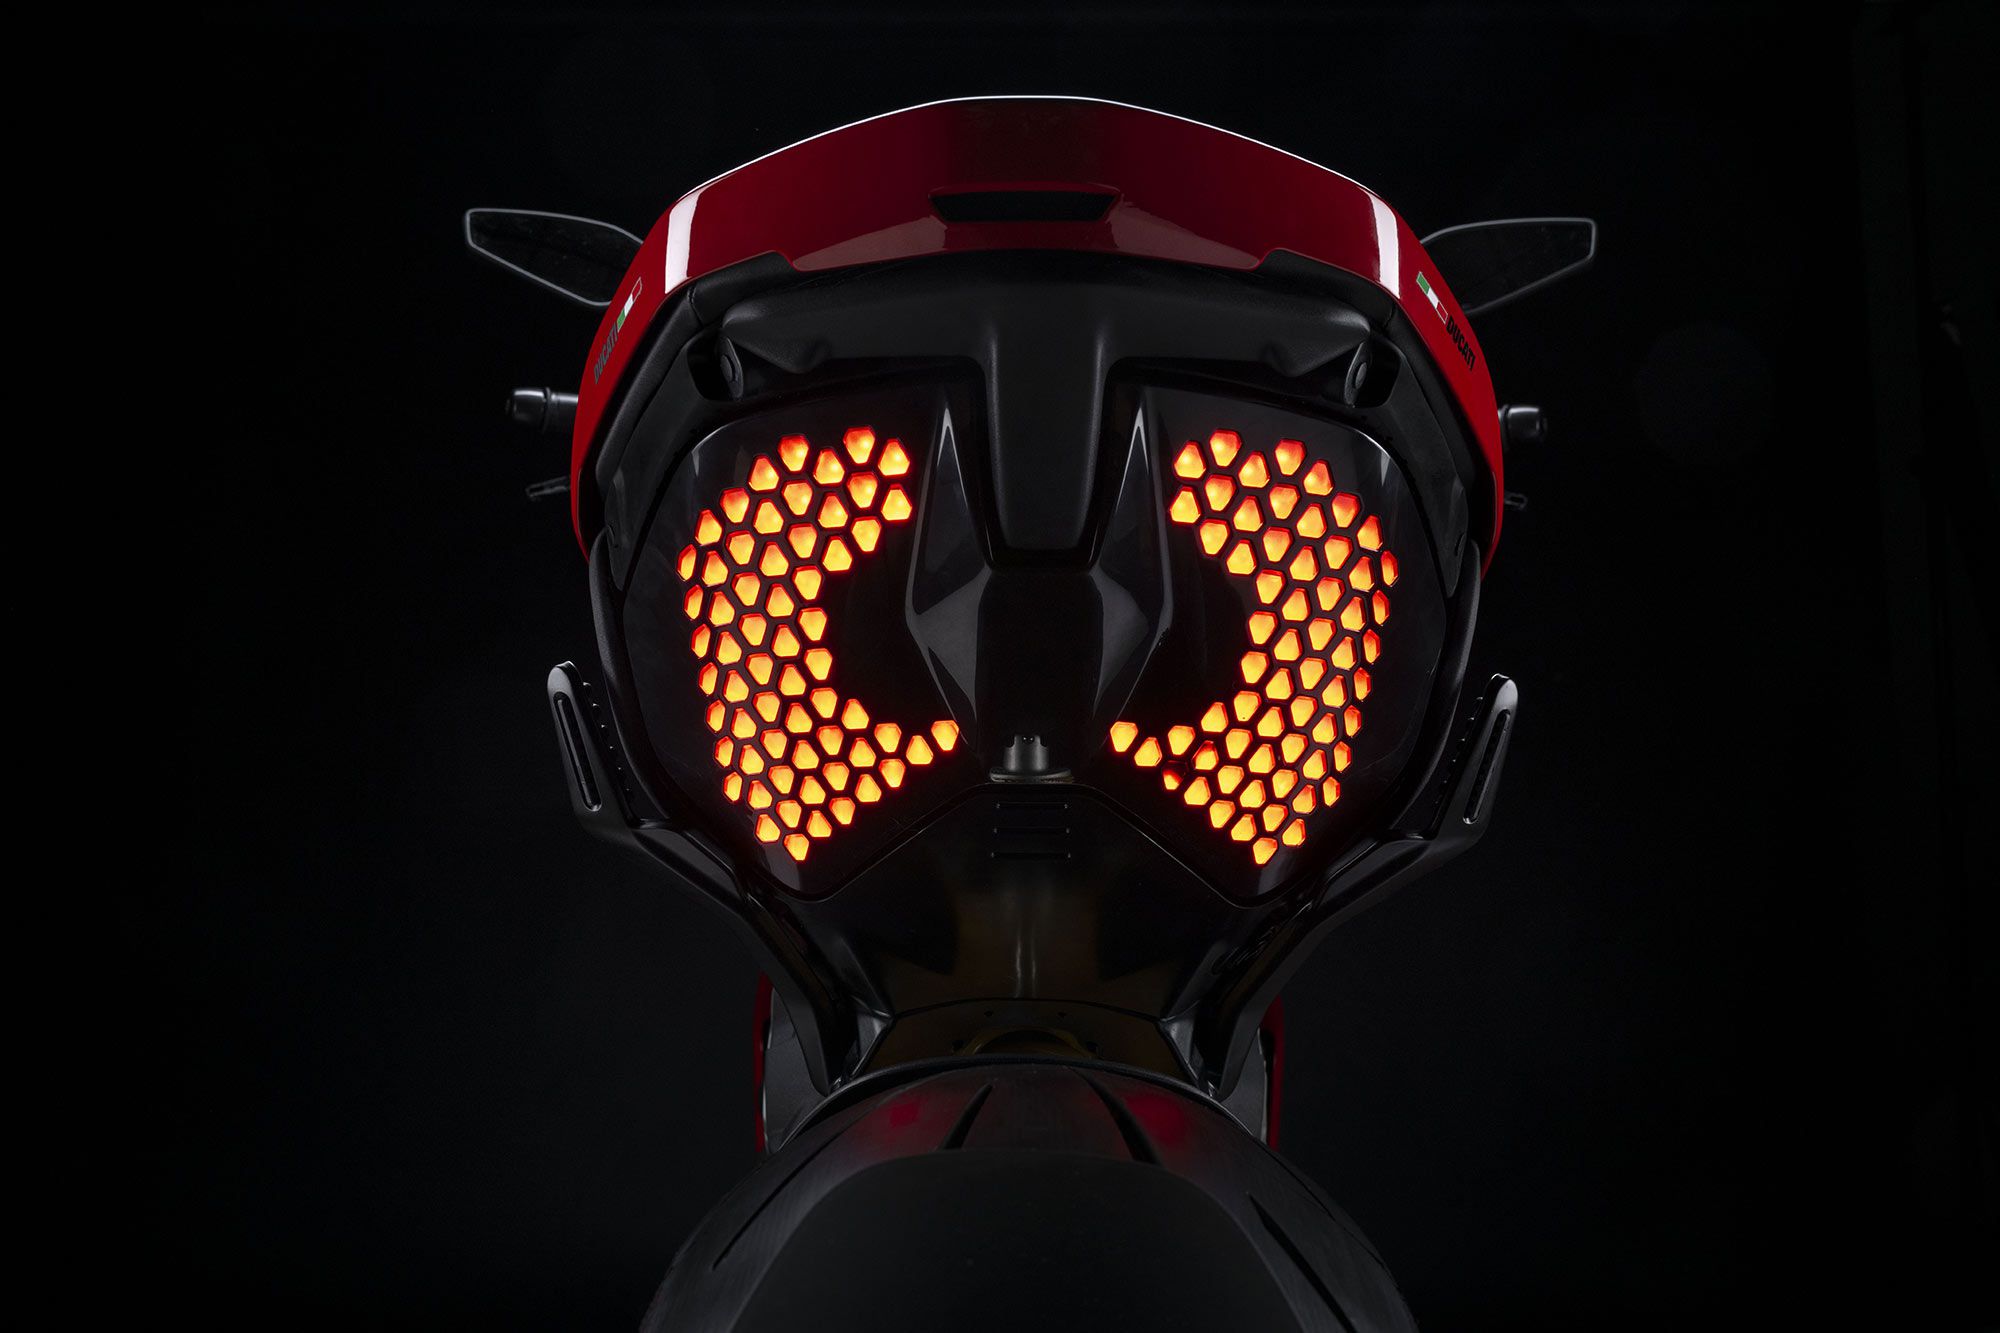 Ducati isn’t afraid to push the limits when it comes to styling, especially on the Diavel. Taillights are made of dozens of tiny LEDs shining through honeycomb-style holes under the tail.